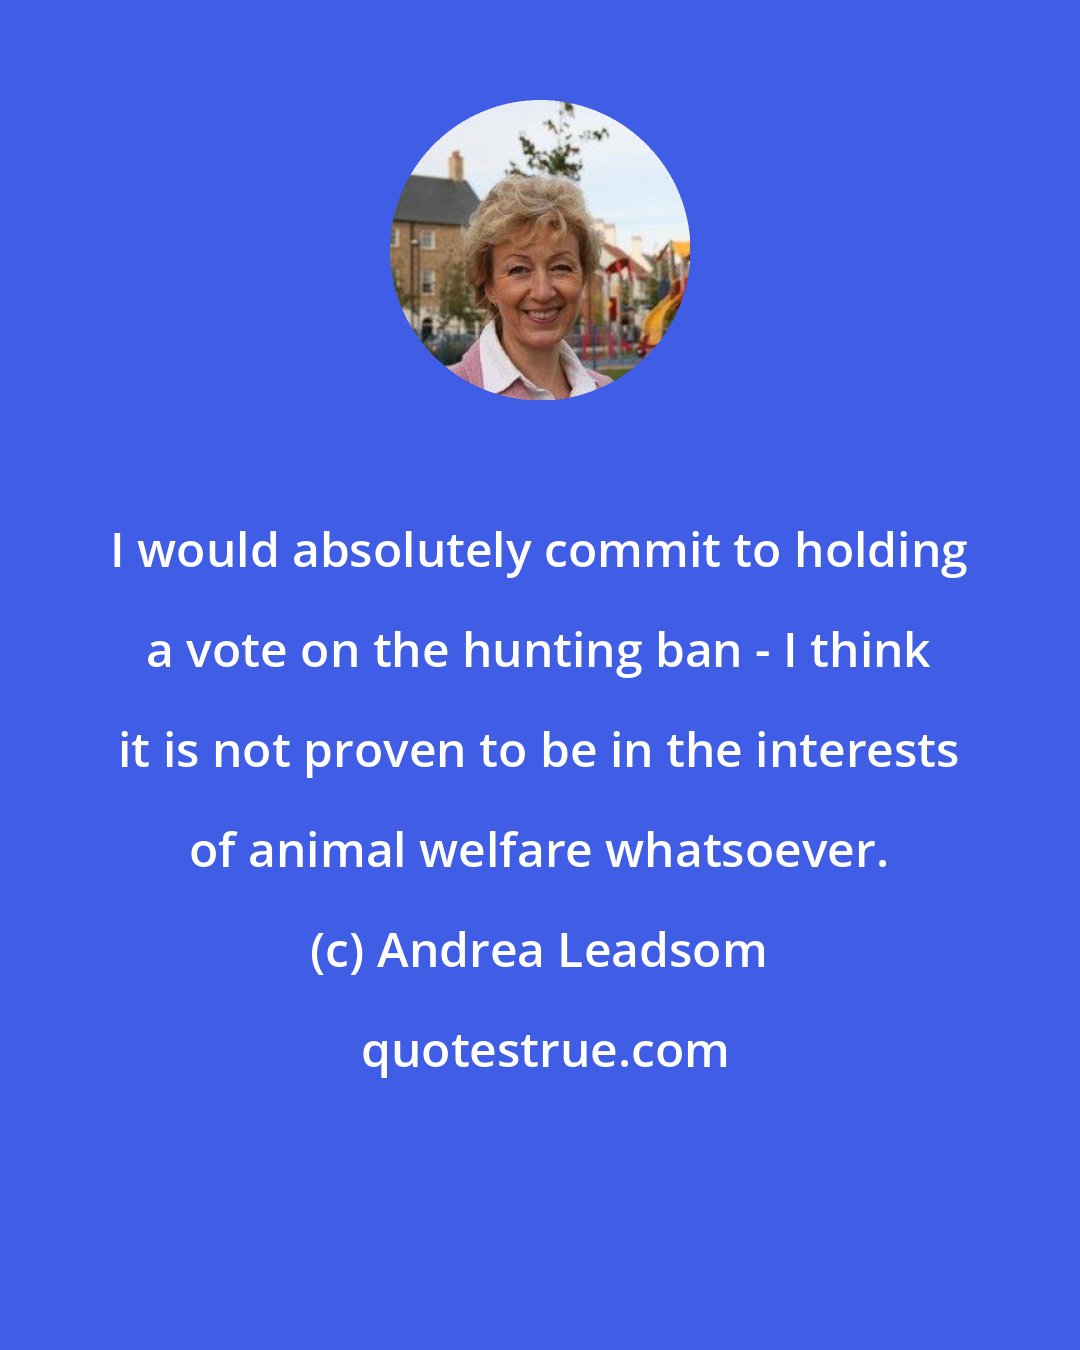 Andrea Leadsom: I would absolutely commit to holding a vote on the hunting ban - I think it is not proven to be in the interests of animal welfare whatsoever.